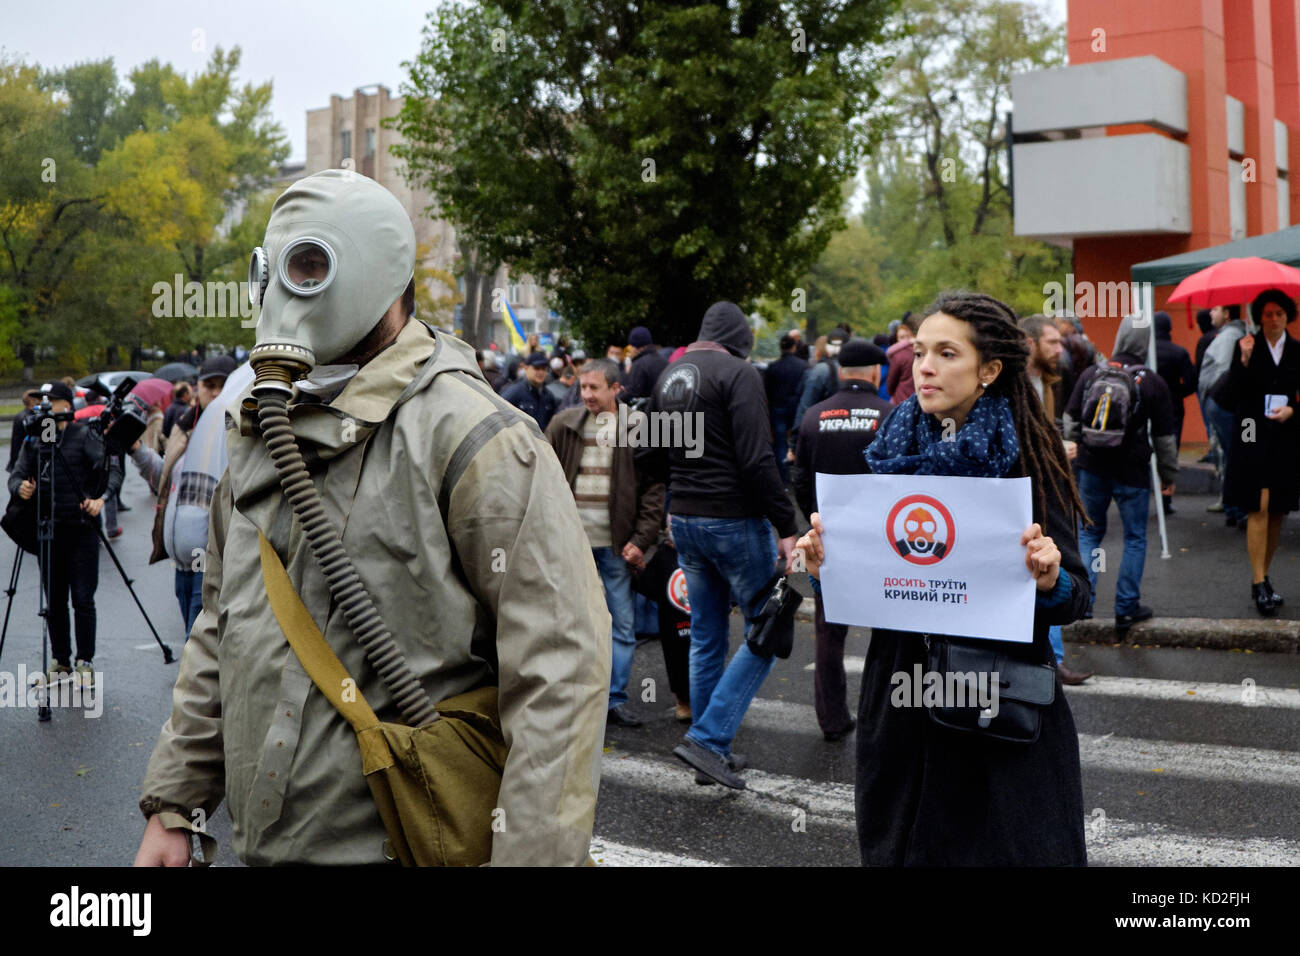 Kryvyi Rih, Ukraine - October 9, 2017: Man wearing gas masks and young woman holding poster 'Stop to poison Kryvyi Rih' near ArcelorMittal Kryvyi Rih PJSC brand monument during anti-pollution protest meeting Credit: Dmytro Aliokhin/Alamy Live News Stock Photo